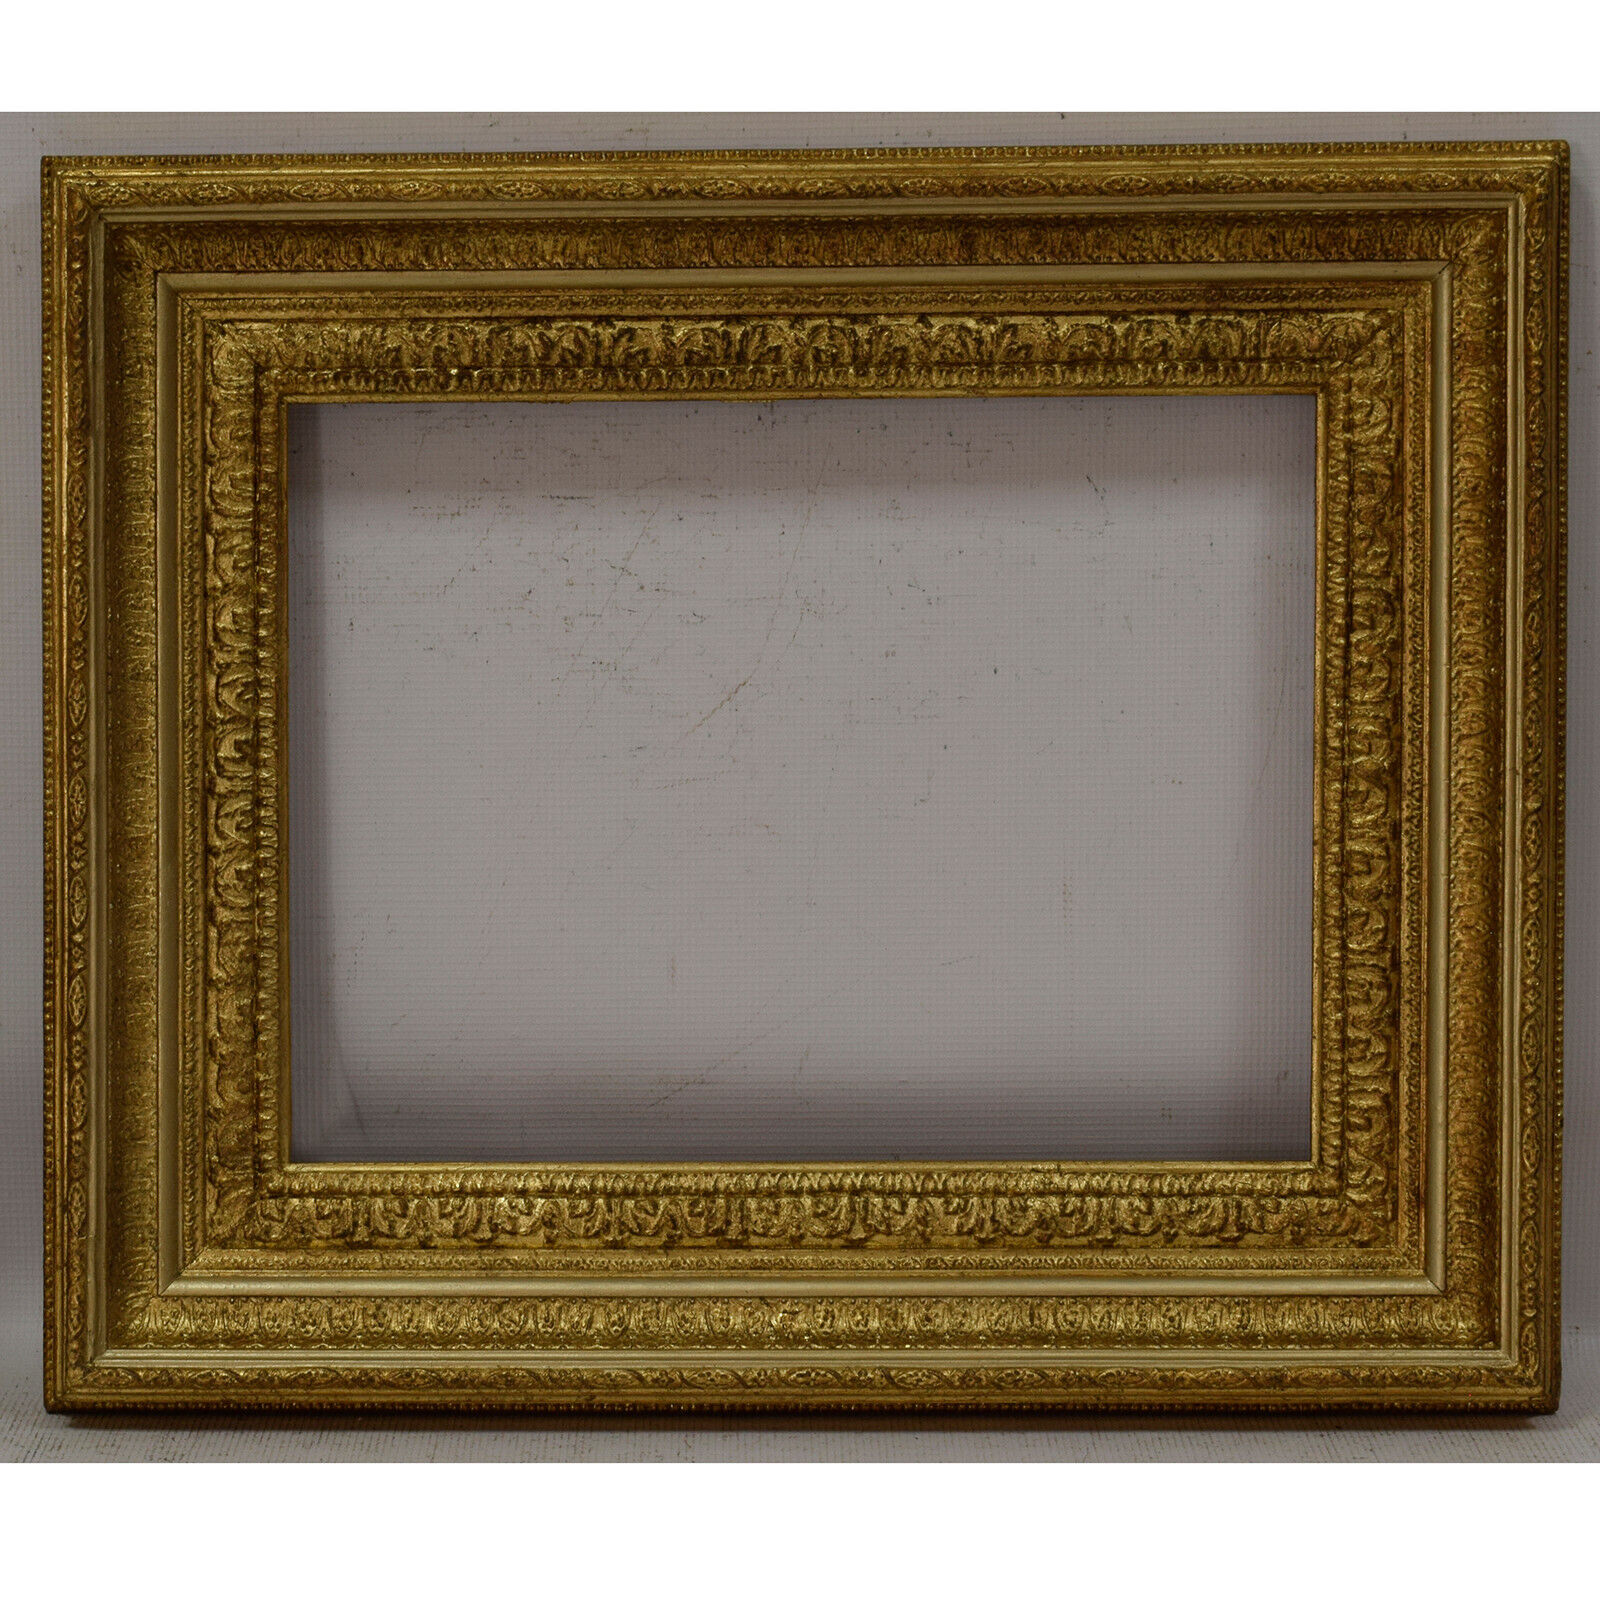 Ca. 1870-1900 Old wooden frame decorative with metal leaf Internal: 15,9x12 in